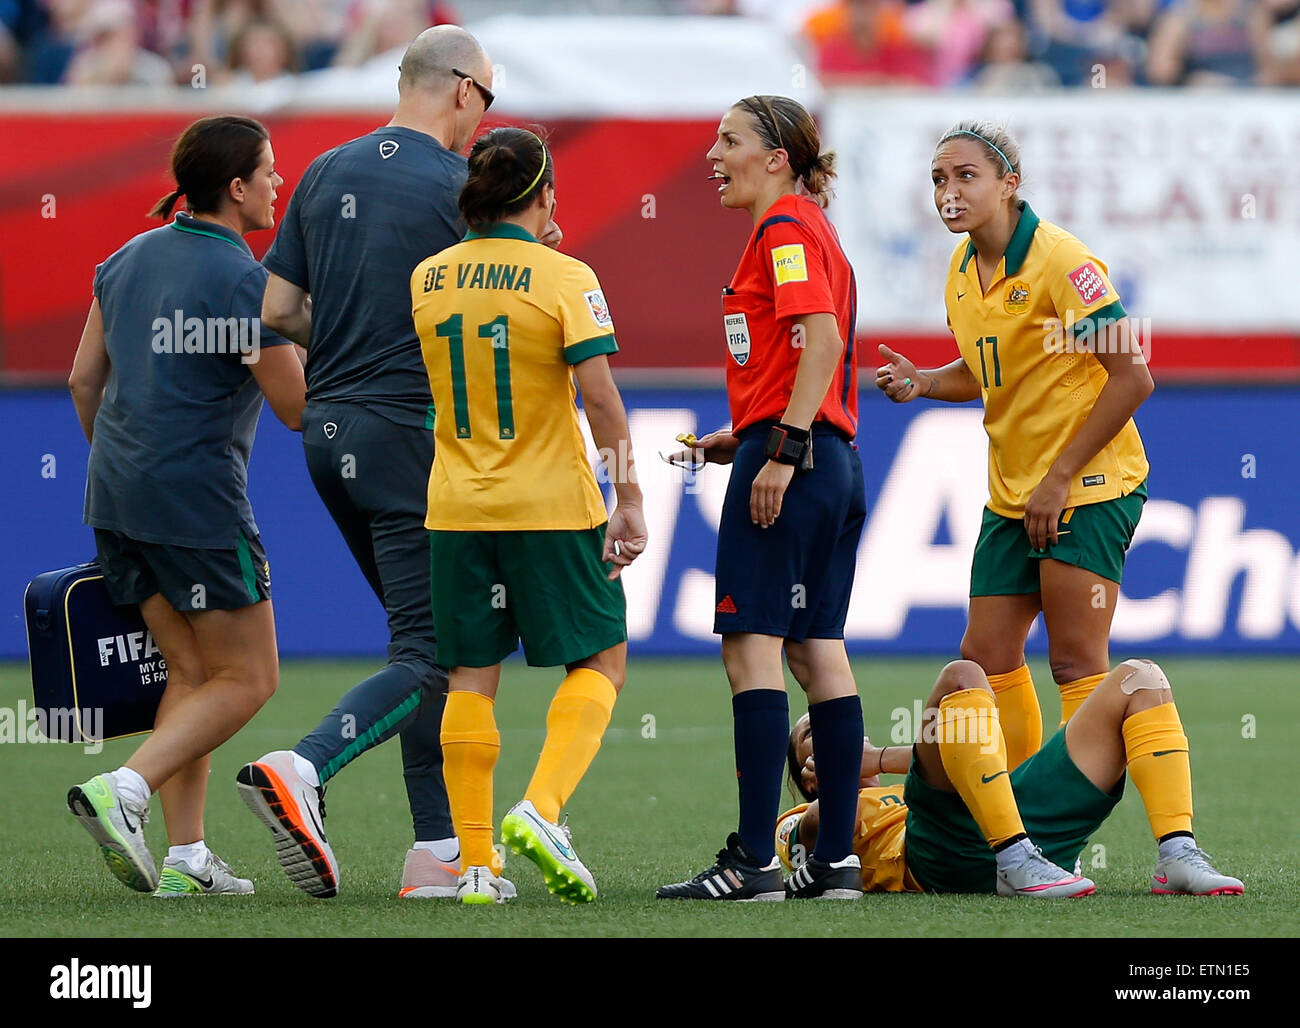 Winnipeg. 12th June, 2015. Photo taken on June 12, 2015 shows Kyah Simon (1st R) of Australia arguing with French referee Stephanie Frappart after her teammate Samantha Kerr (2nd R) gets injured after being elbowed in the face by Nigeria's Ugo Njoku during the Group D match between Australia and Nigeria in Winnipeg, Canada. FIFA confirmed on Sunday that Nigeria's Ugo Njoku has been banned for three games and fined CHF 3000 for elbowing Australian Samantha Kerr in the face during a clash at the Women's World Cup. © Wang Lili/Xinhua/Alamy Live News Stock Photo